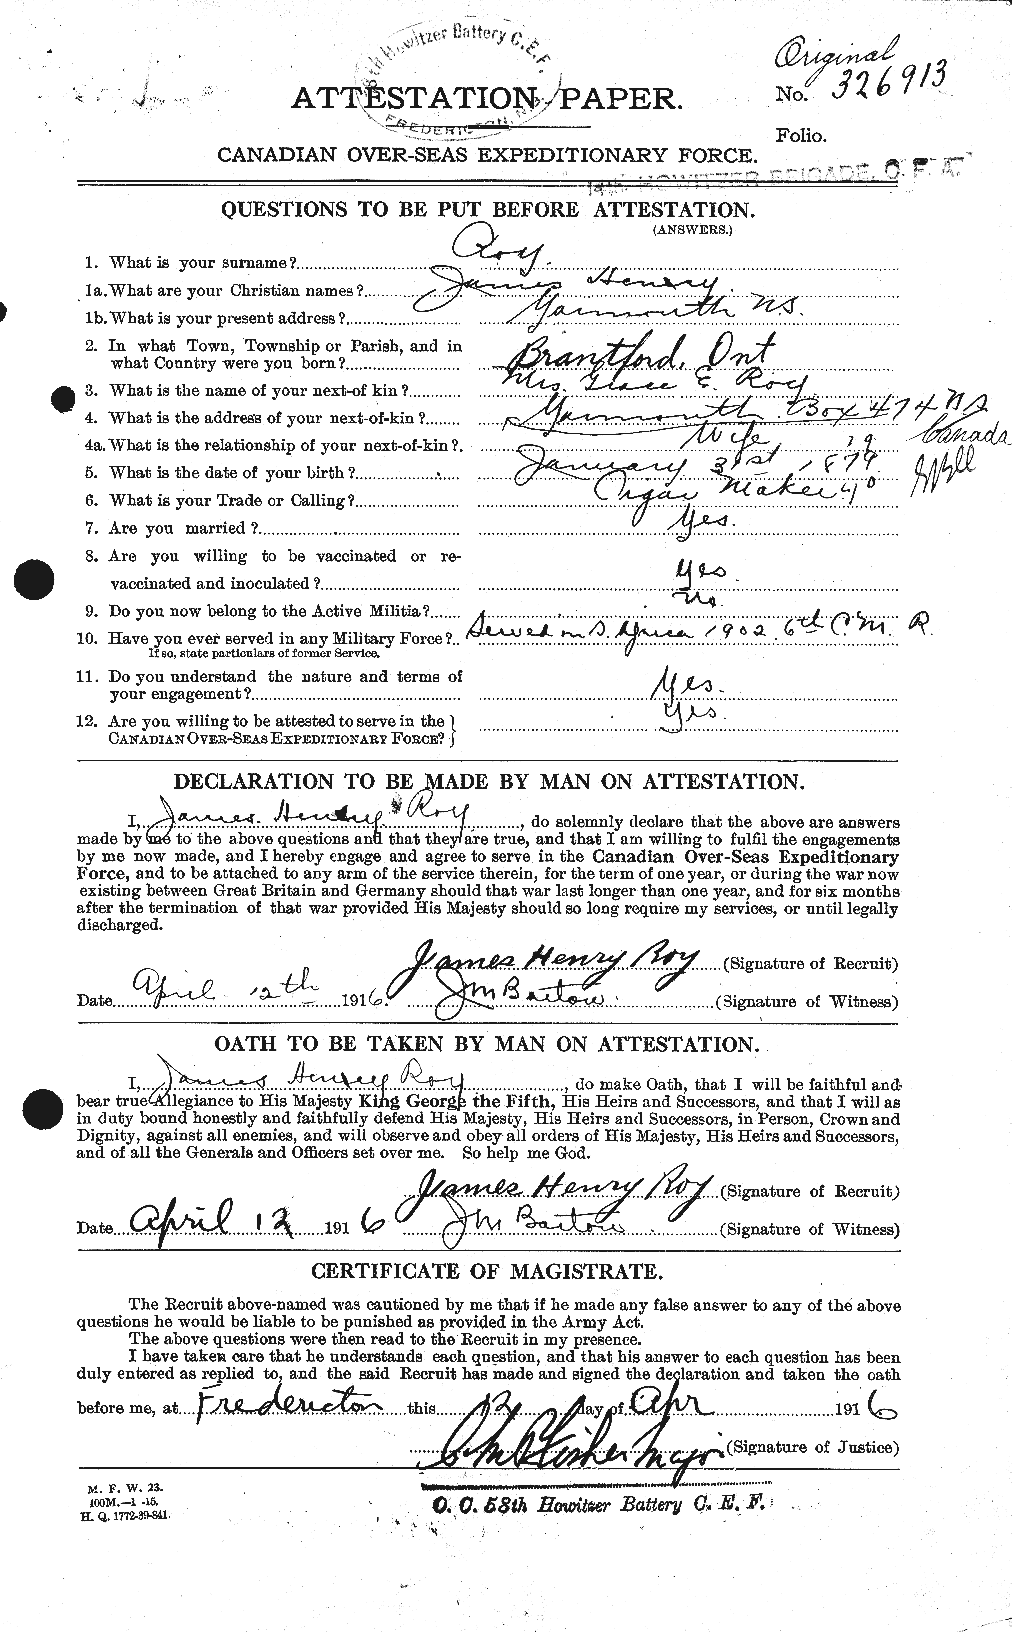 Personnel Records of the First World War - CEF 616724a